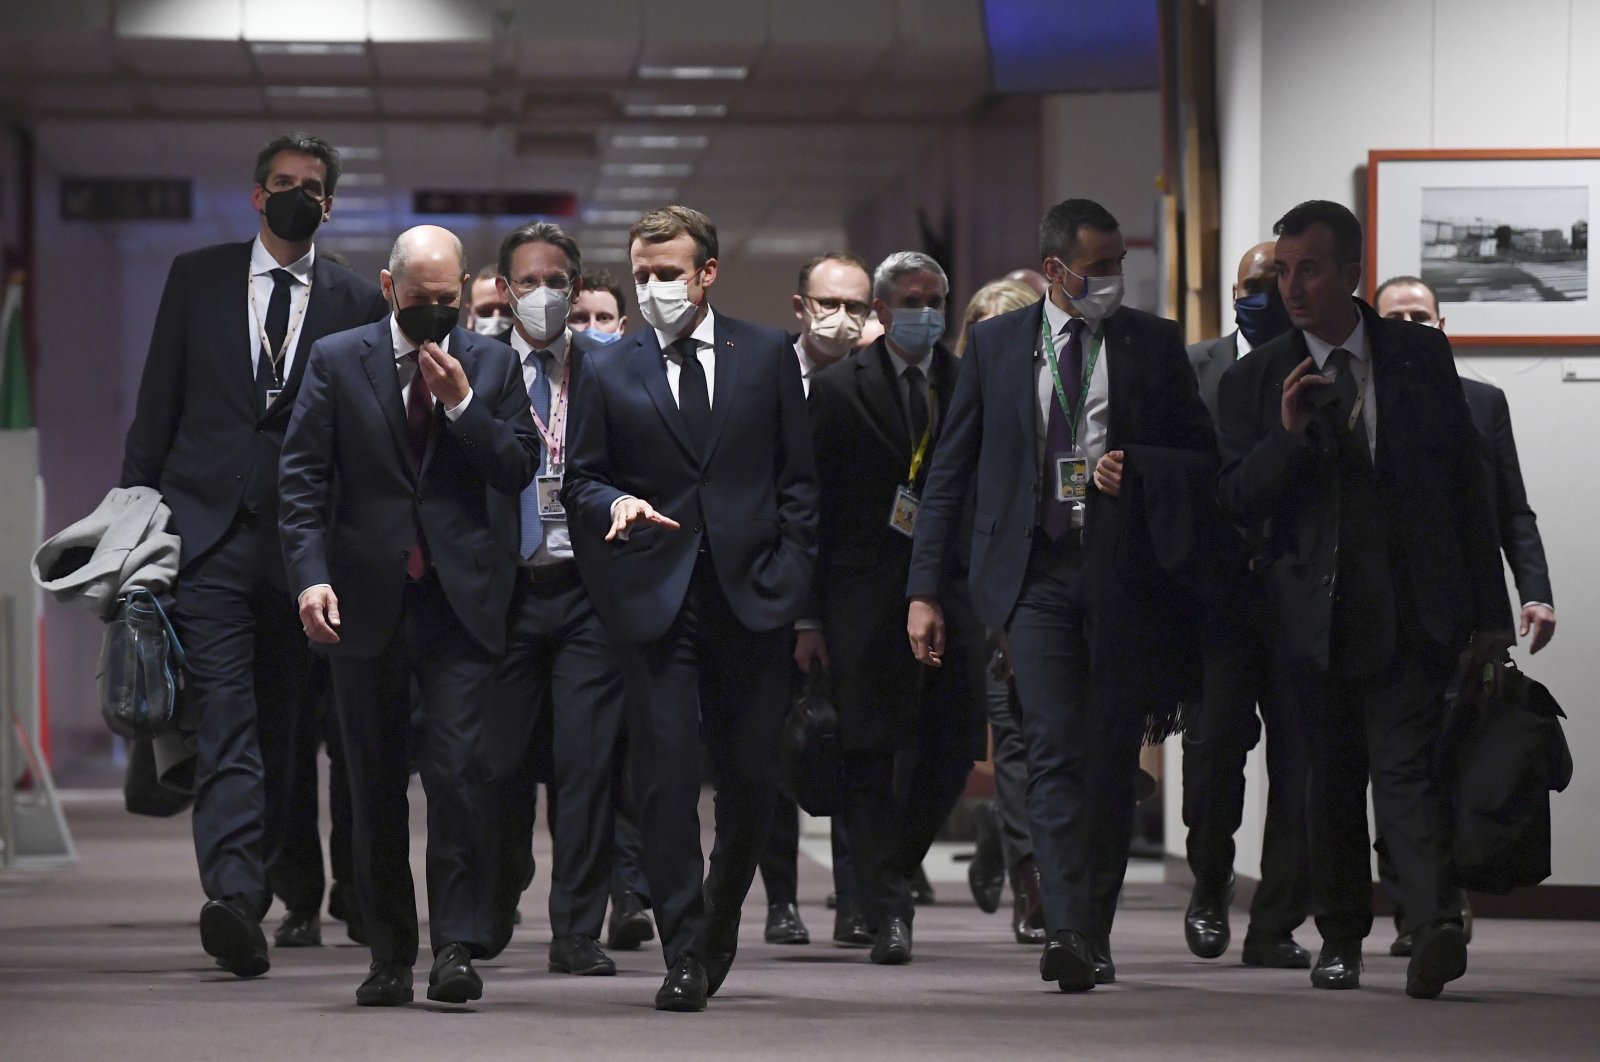 German Chancellor Olaf Scholz (2nd L) and French President Emmanuel Macron (C) walk in the hallway prior to a final media conference at an EU Summit in Brussels, Belgium, Dec. 17, 2021. (AP Photo)